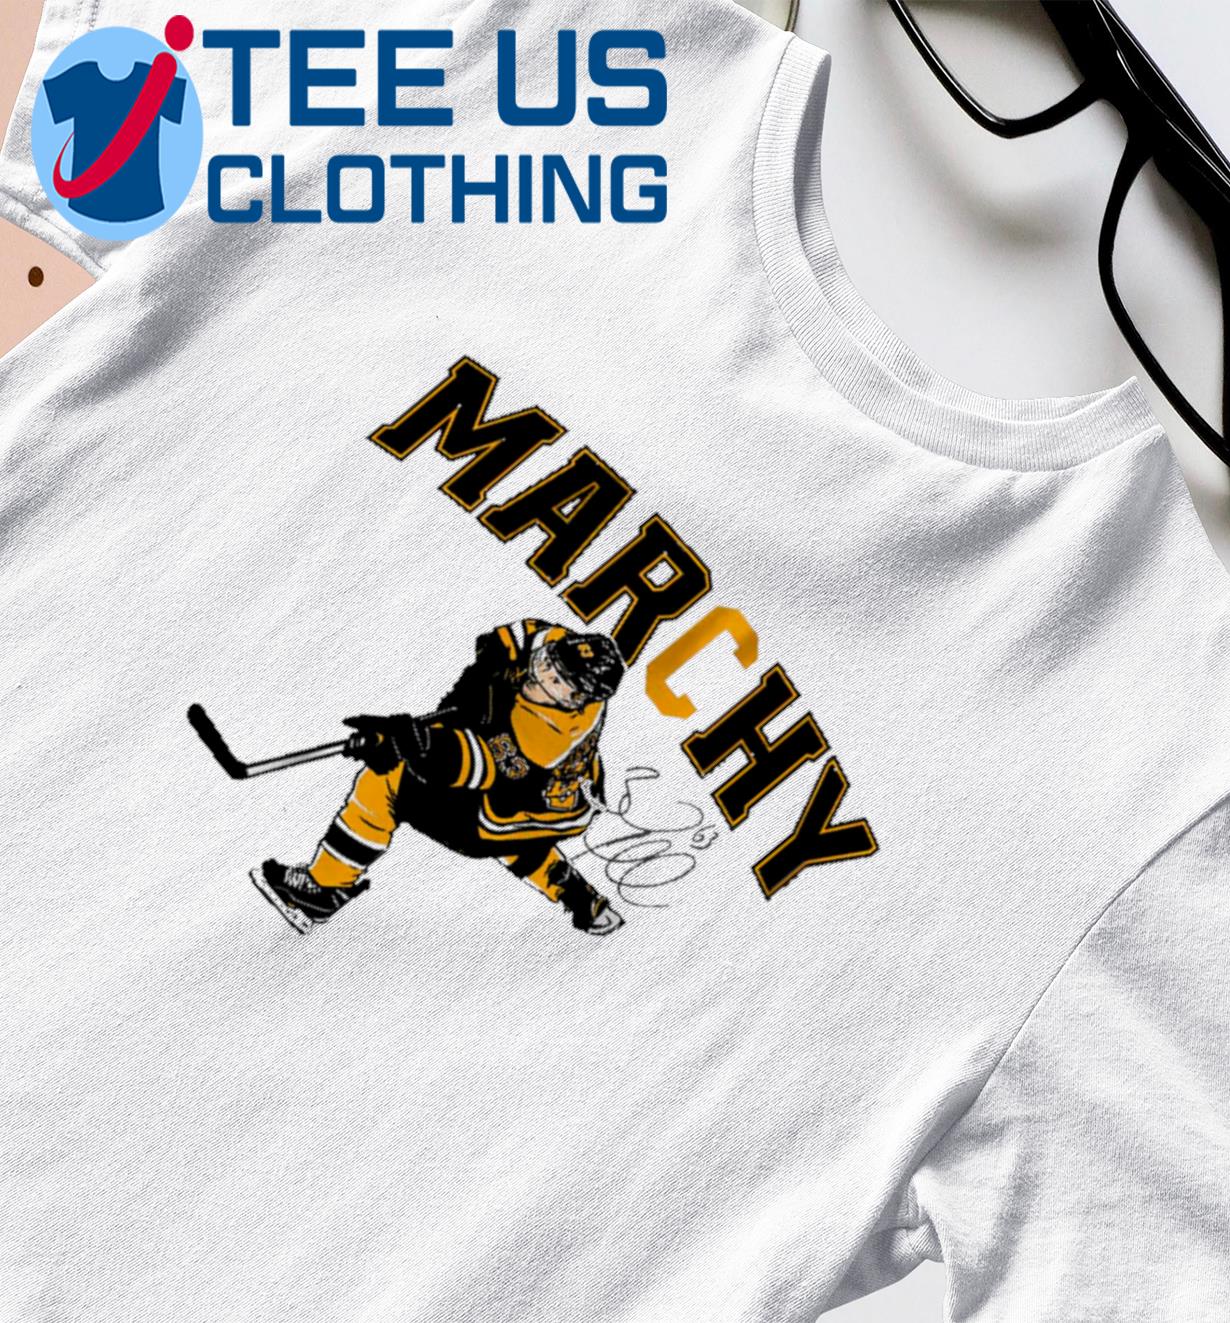 Brad Marchand Captain Marchy Tee Shirt